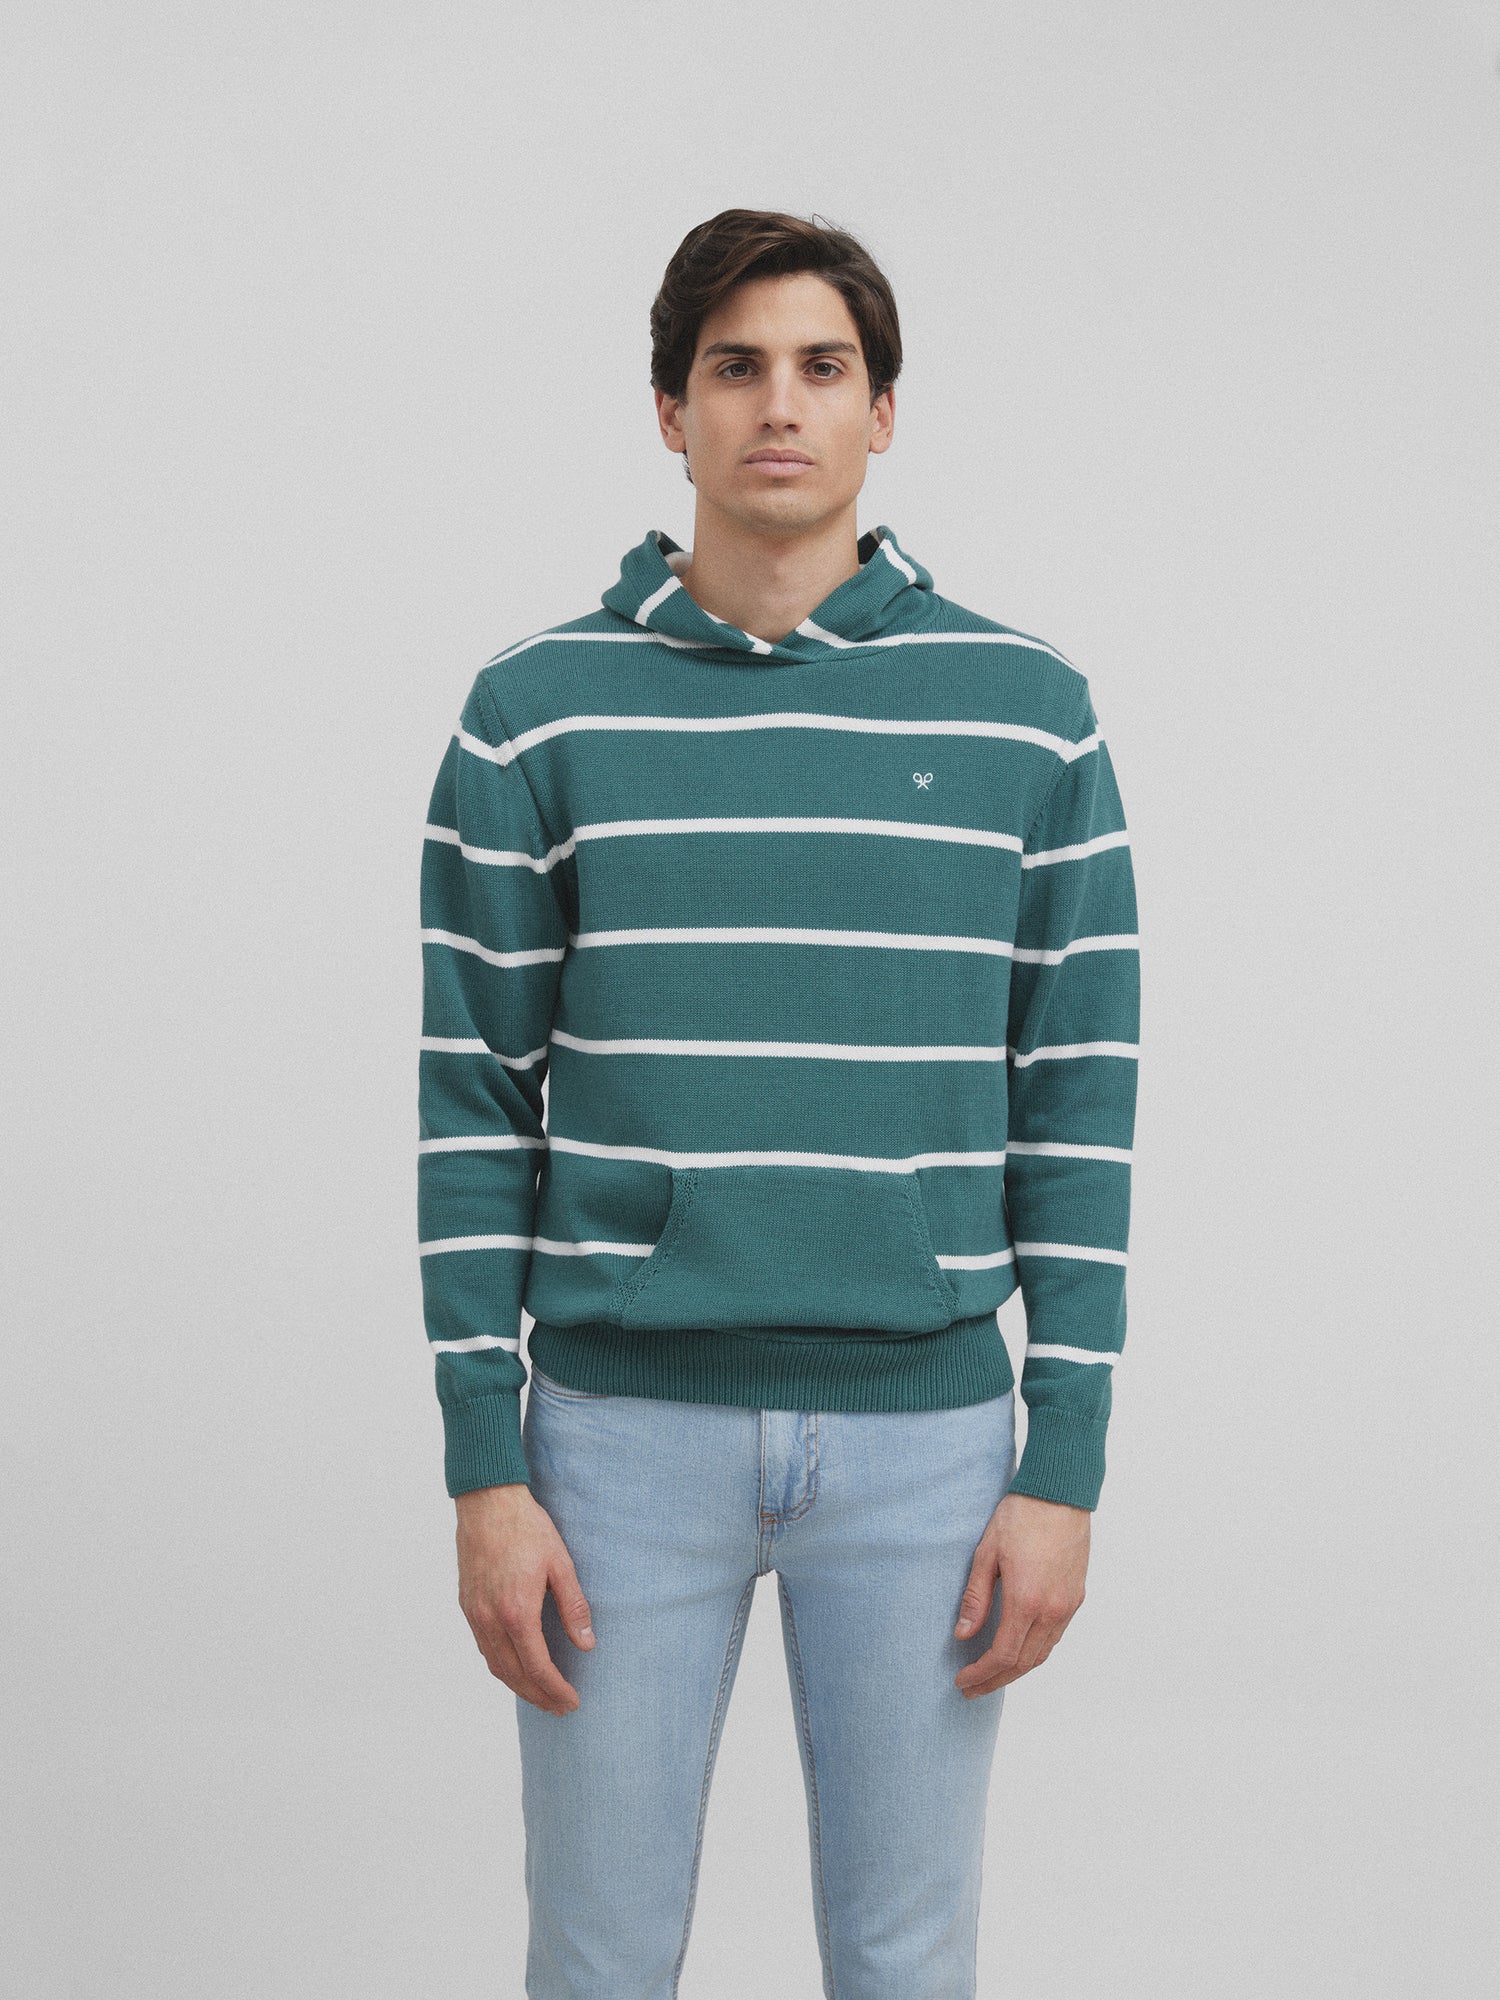 Green striped hooded sweater